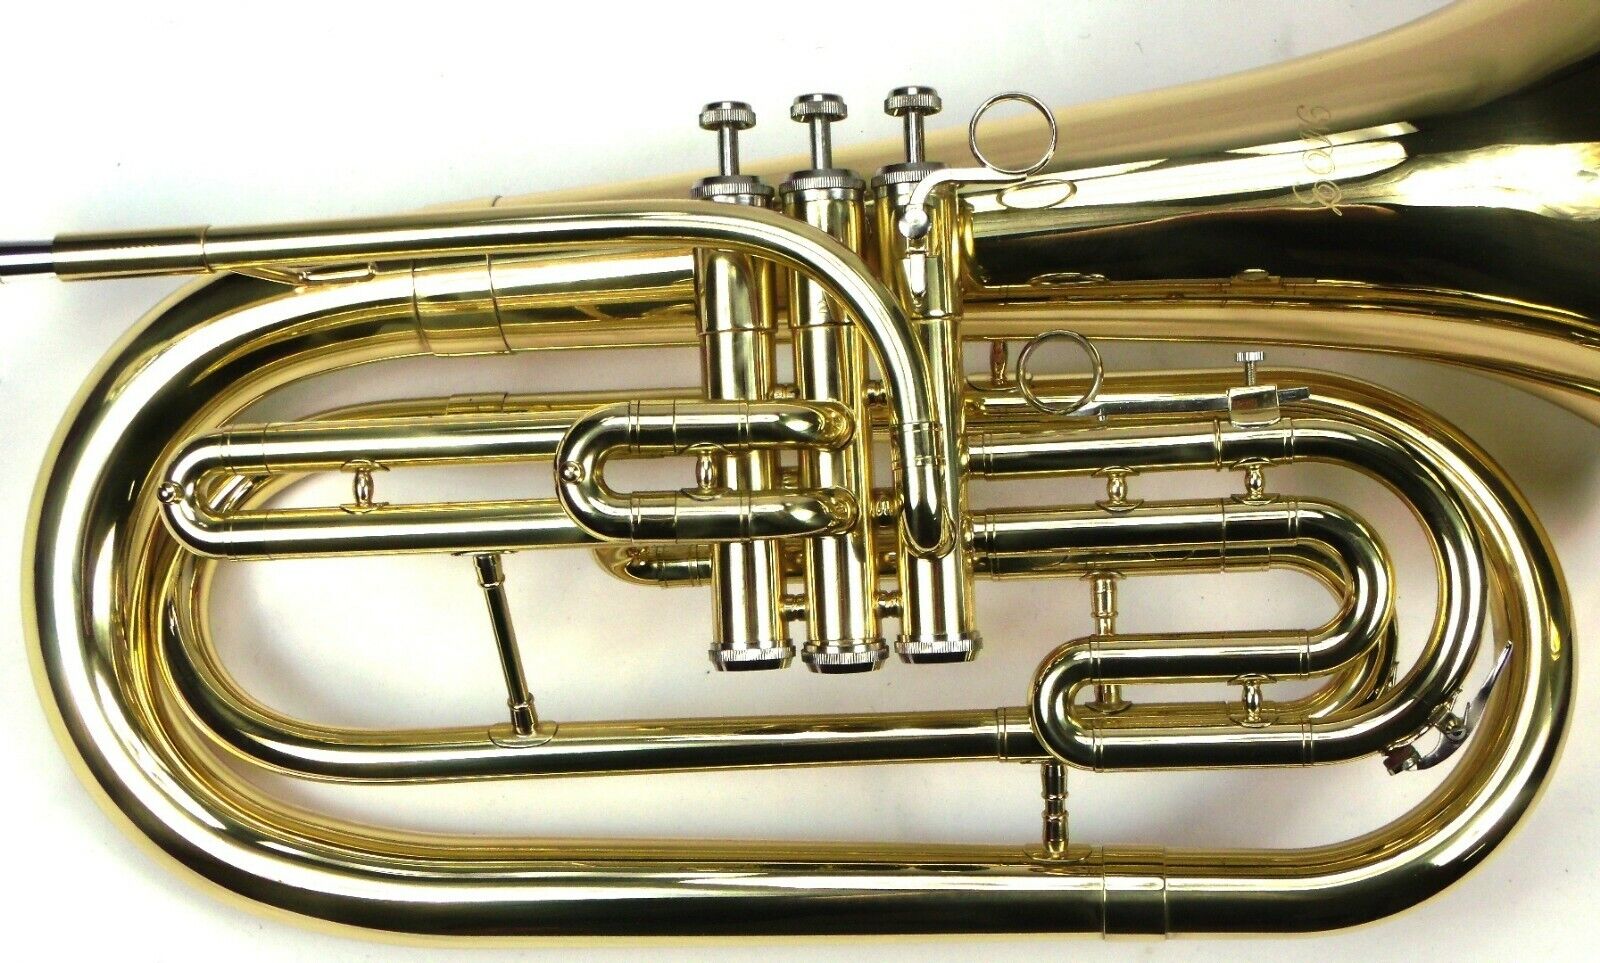 Advanced Monel Pistons Marching Baritone Key of Bb w/ Case Gold Lacquer Finish Moz Does Not Apply - фотография #7